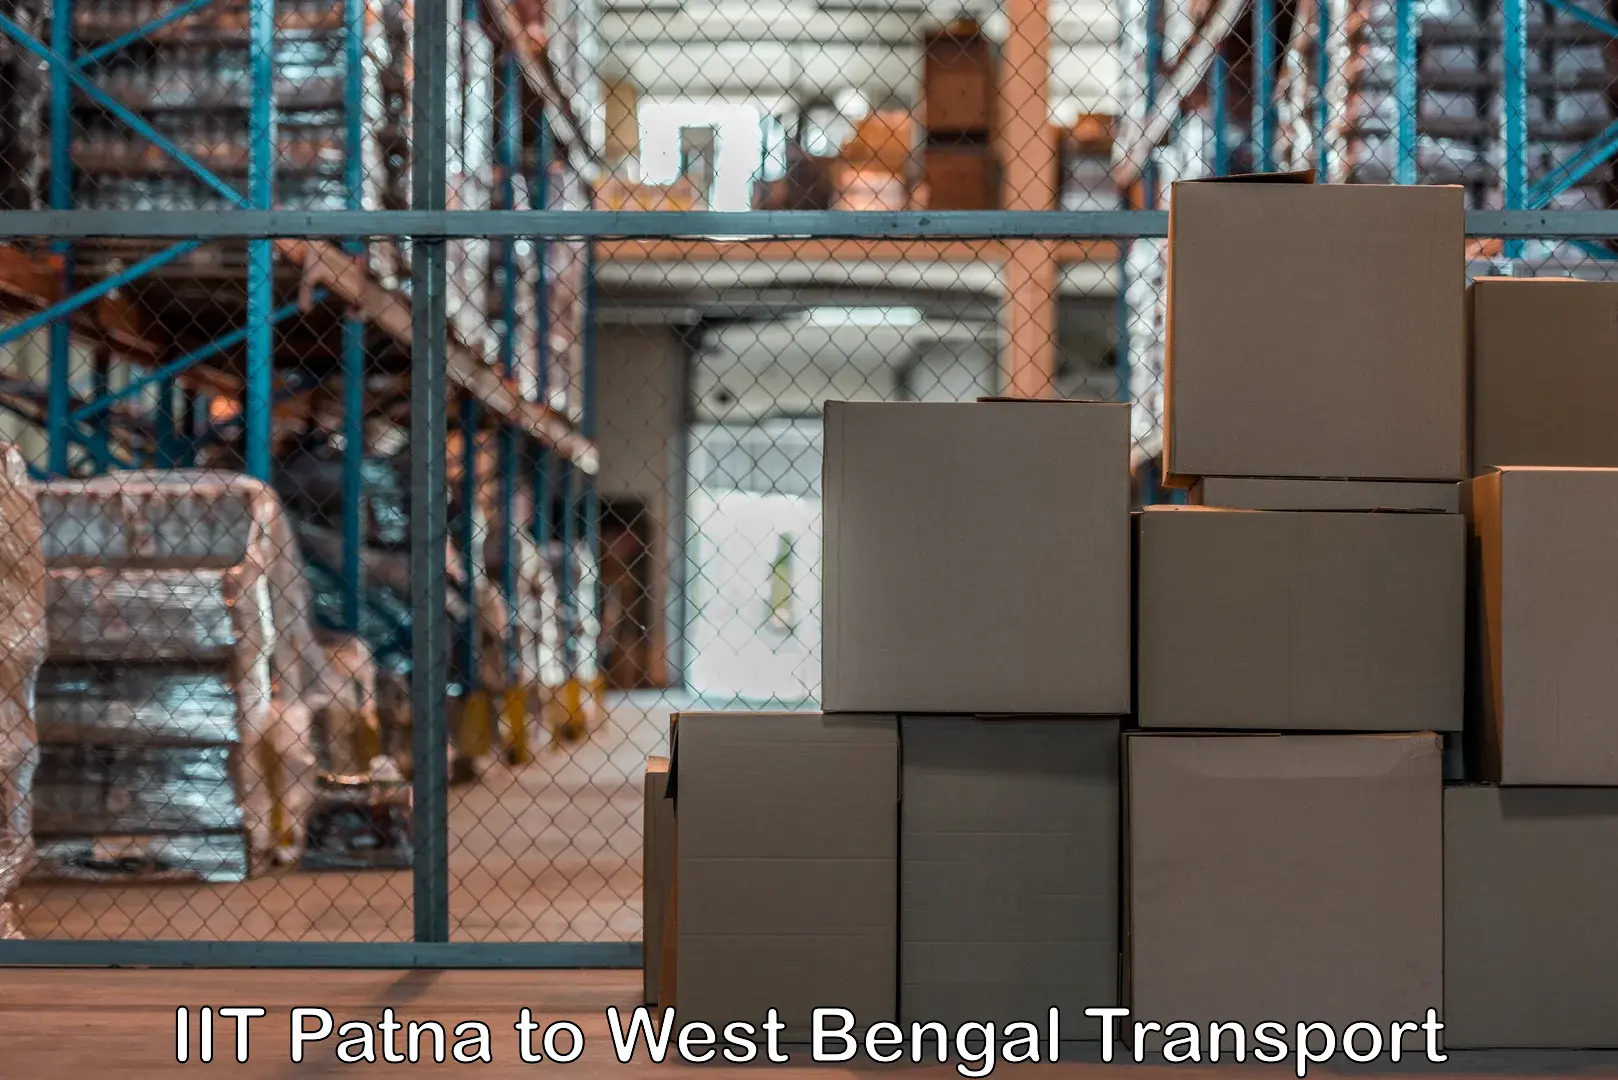 Daily parcel service transport in IIT Patna to Lataguri